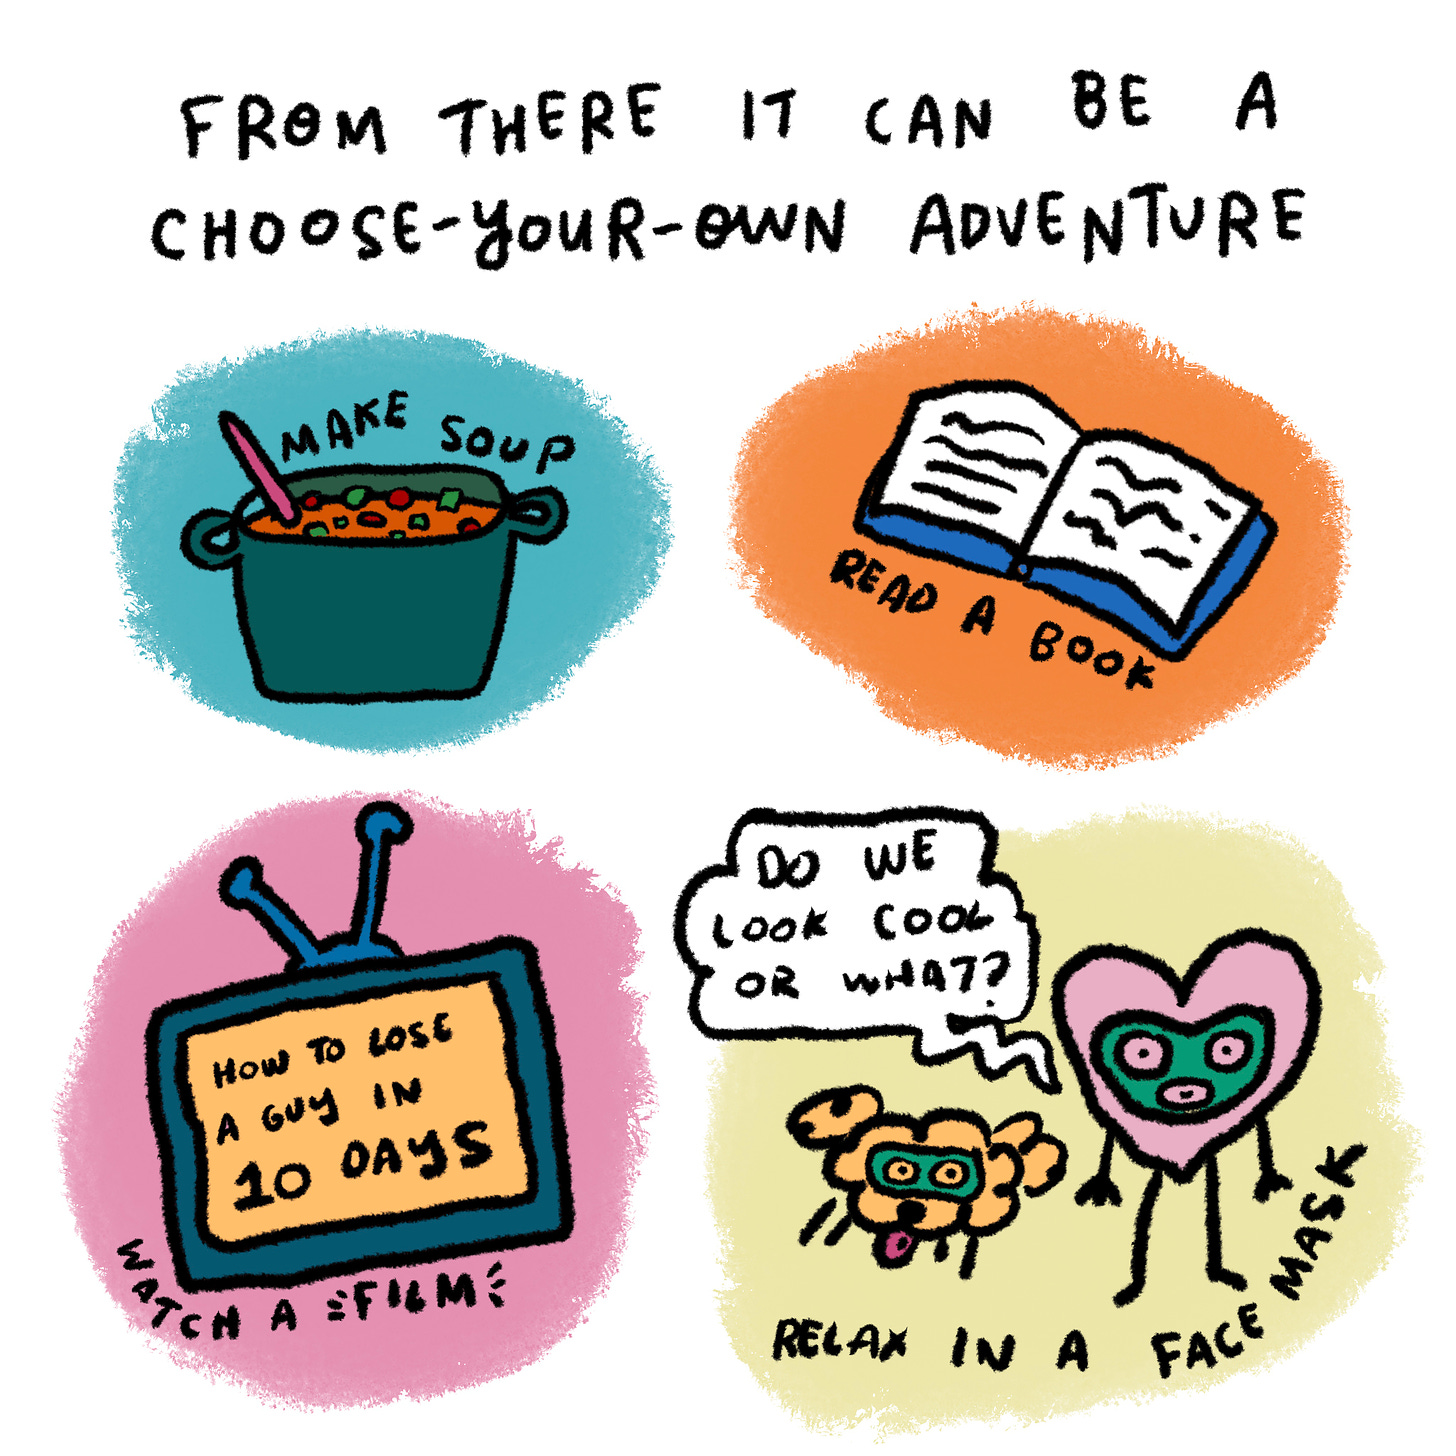 From there it can be a bit of a choose-your-own adventure.  Make soup // Read book // host little movie night // do face mask